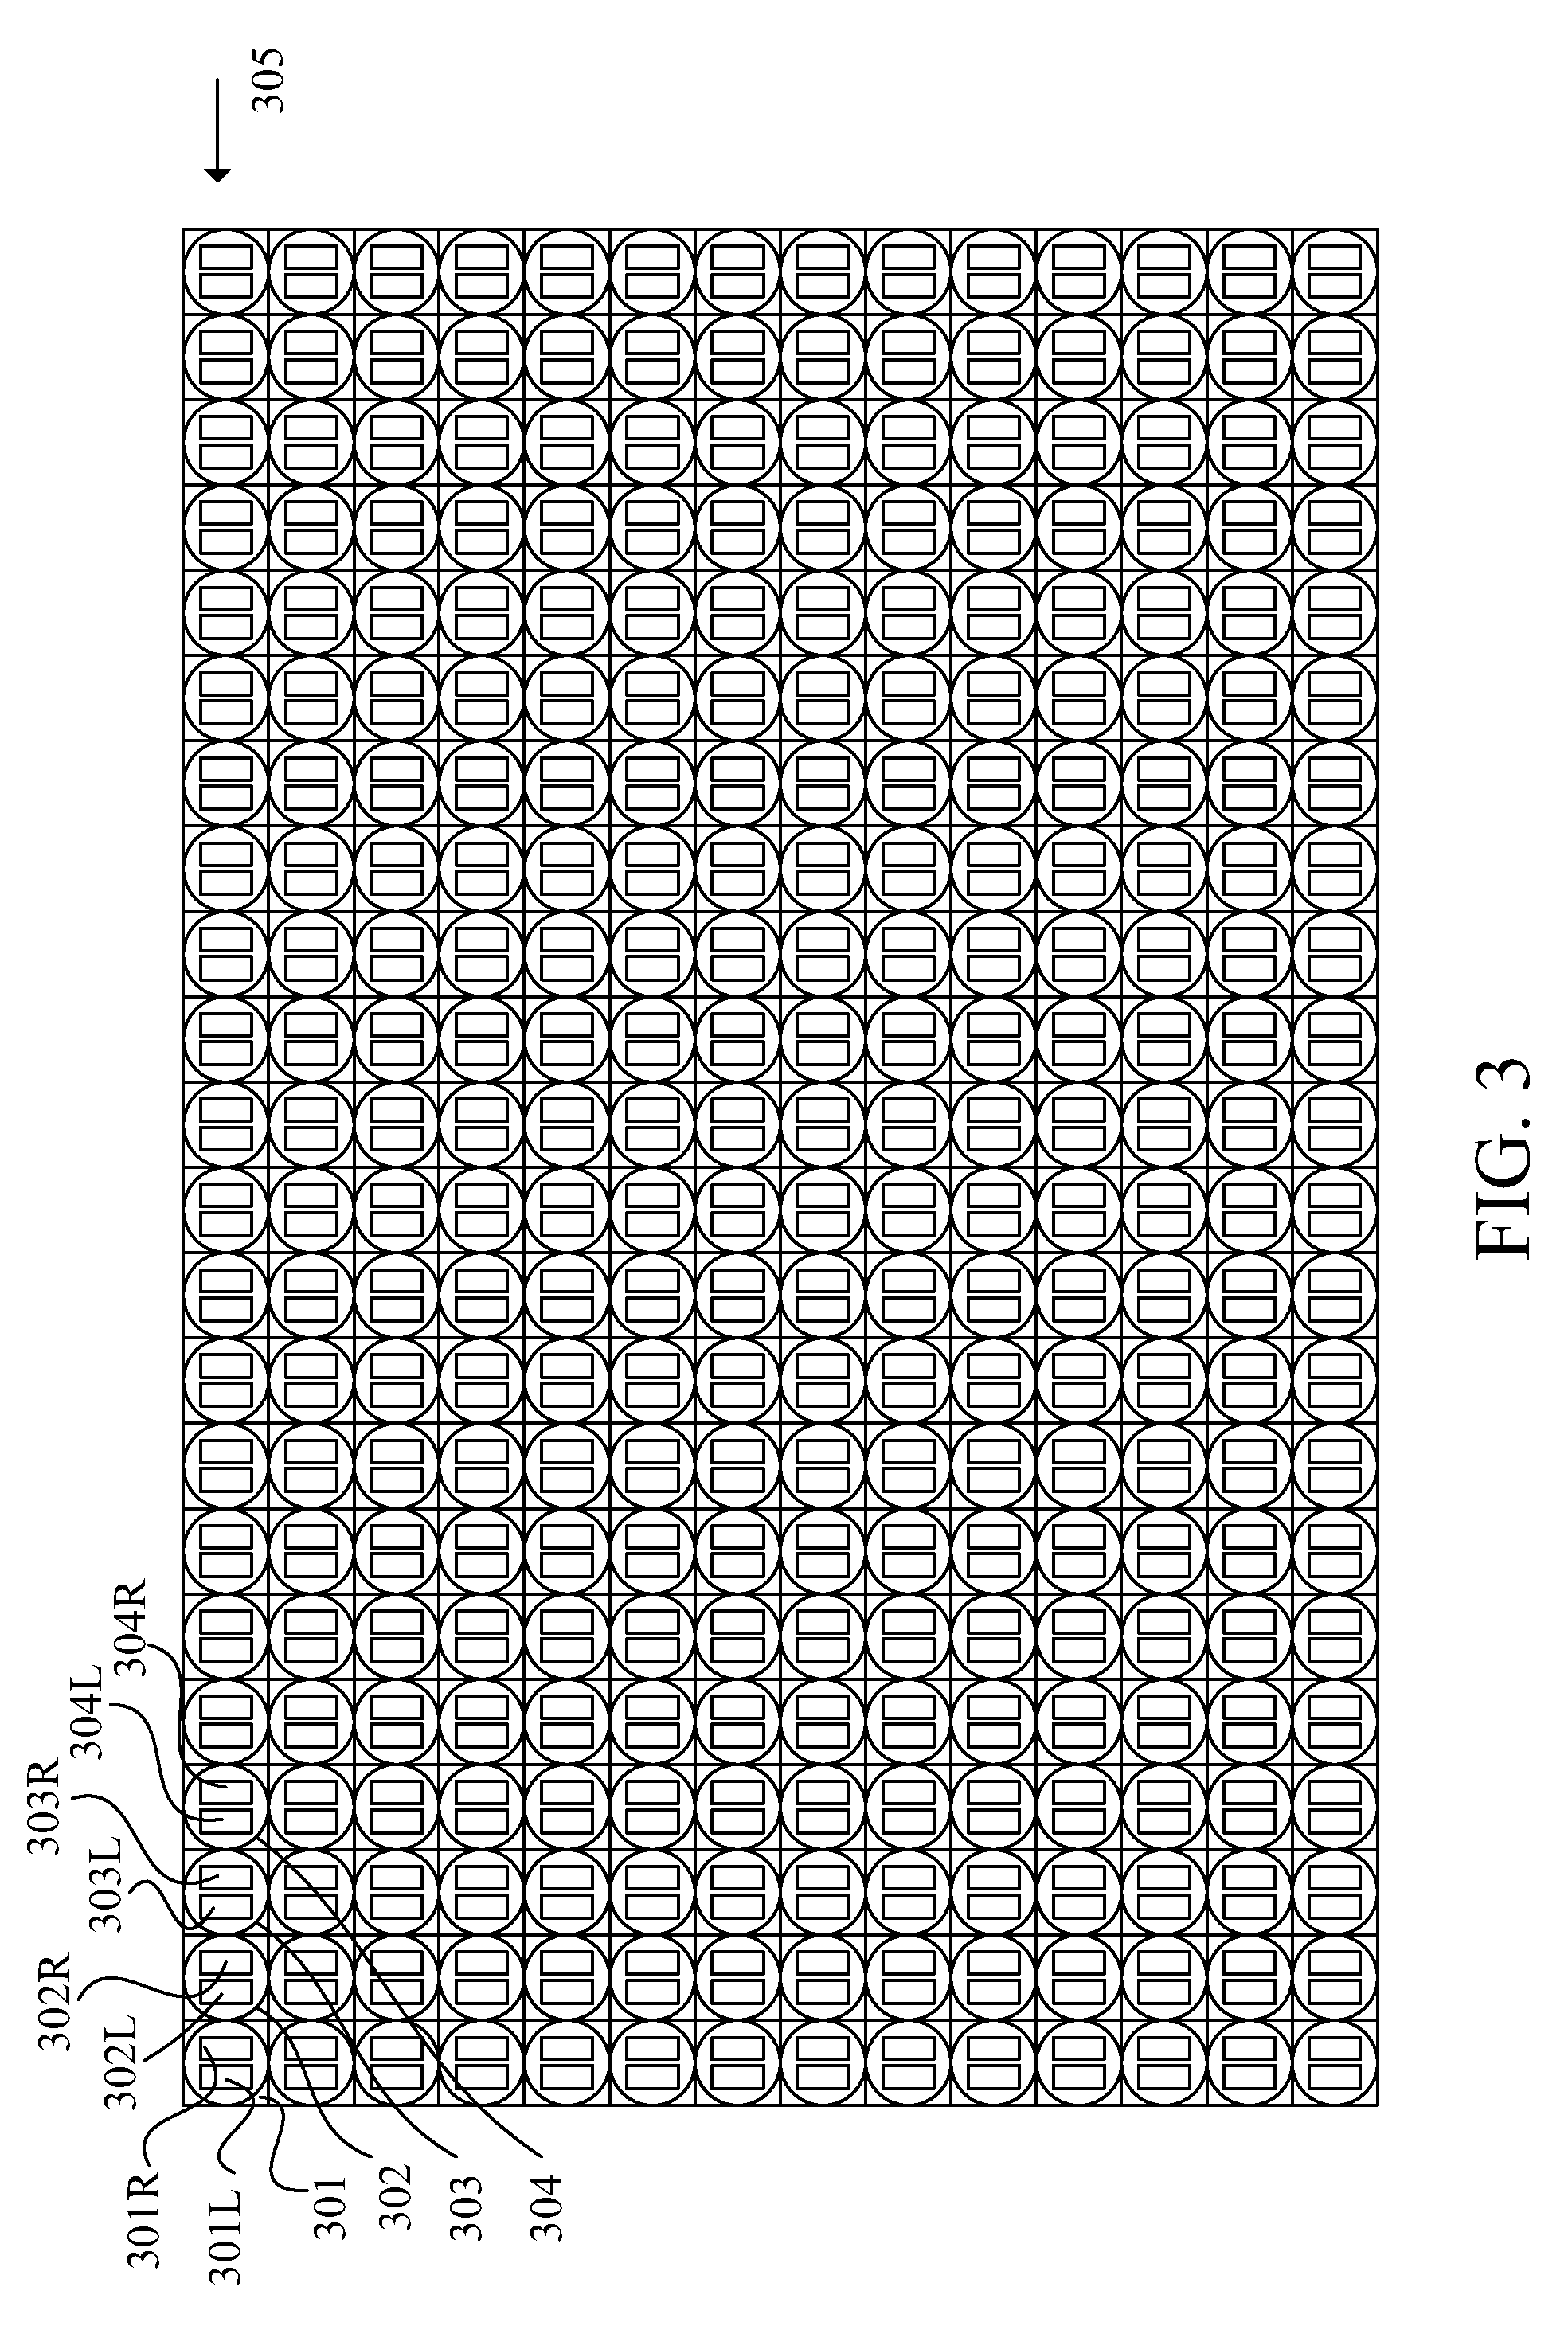 Image pickup apparatus and focus detection method